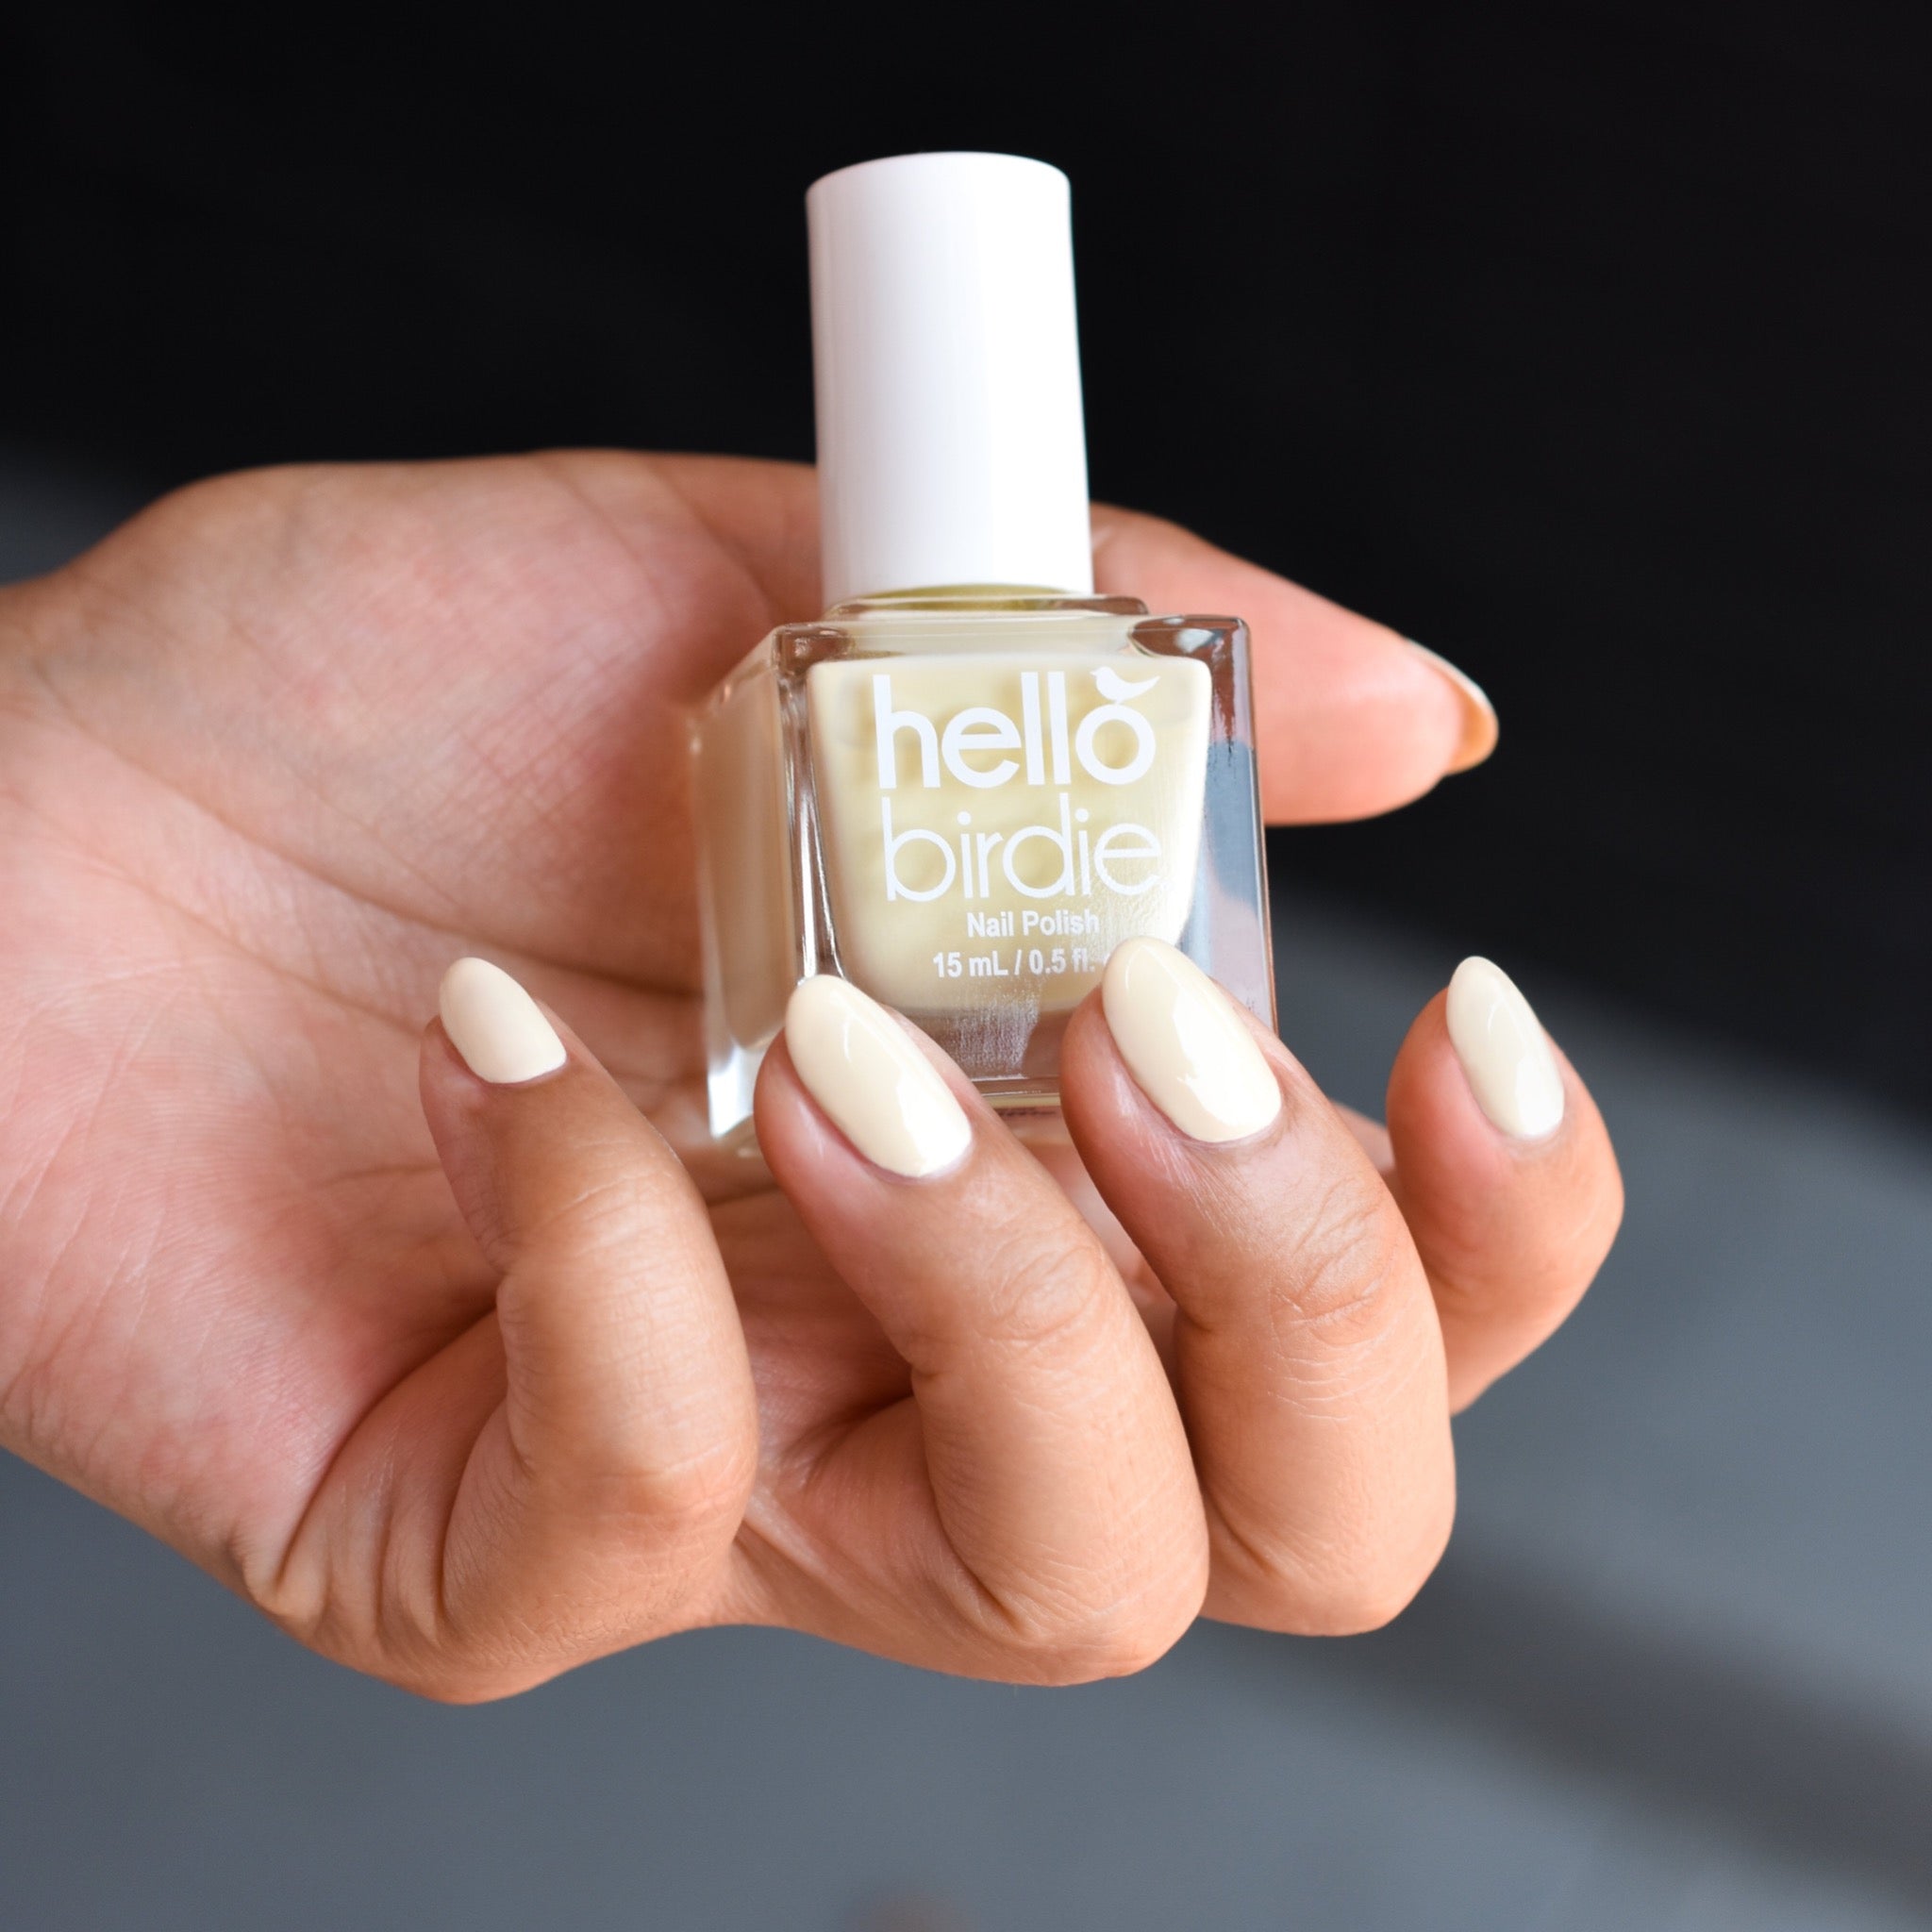 A close up of a mid toned hand comes from the left hand side wearing Three Little Birdies nail polish from Hello Birdie which is a light pastel yellow hue. The hand is clutching a bottle of the nail polish, which has a cube shape and white cap and white text. The background is an out of focus gray and black.